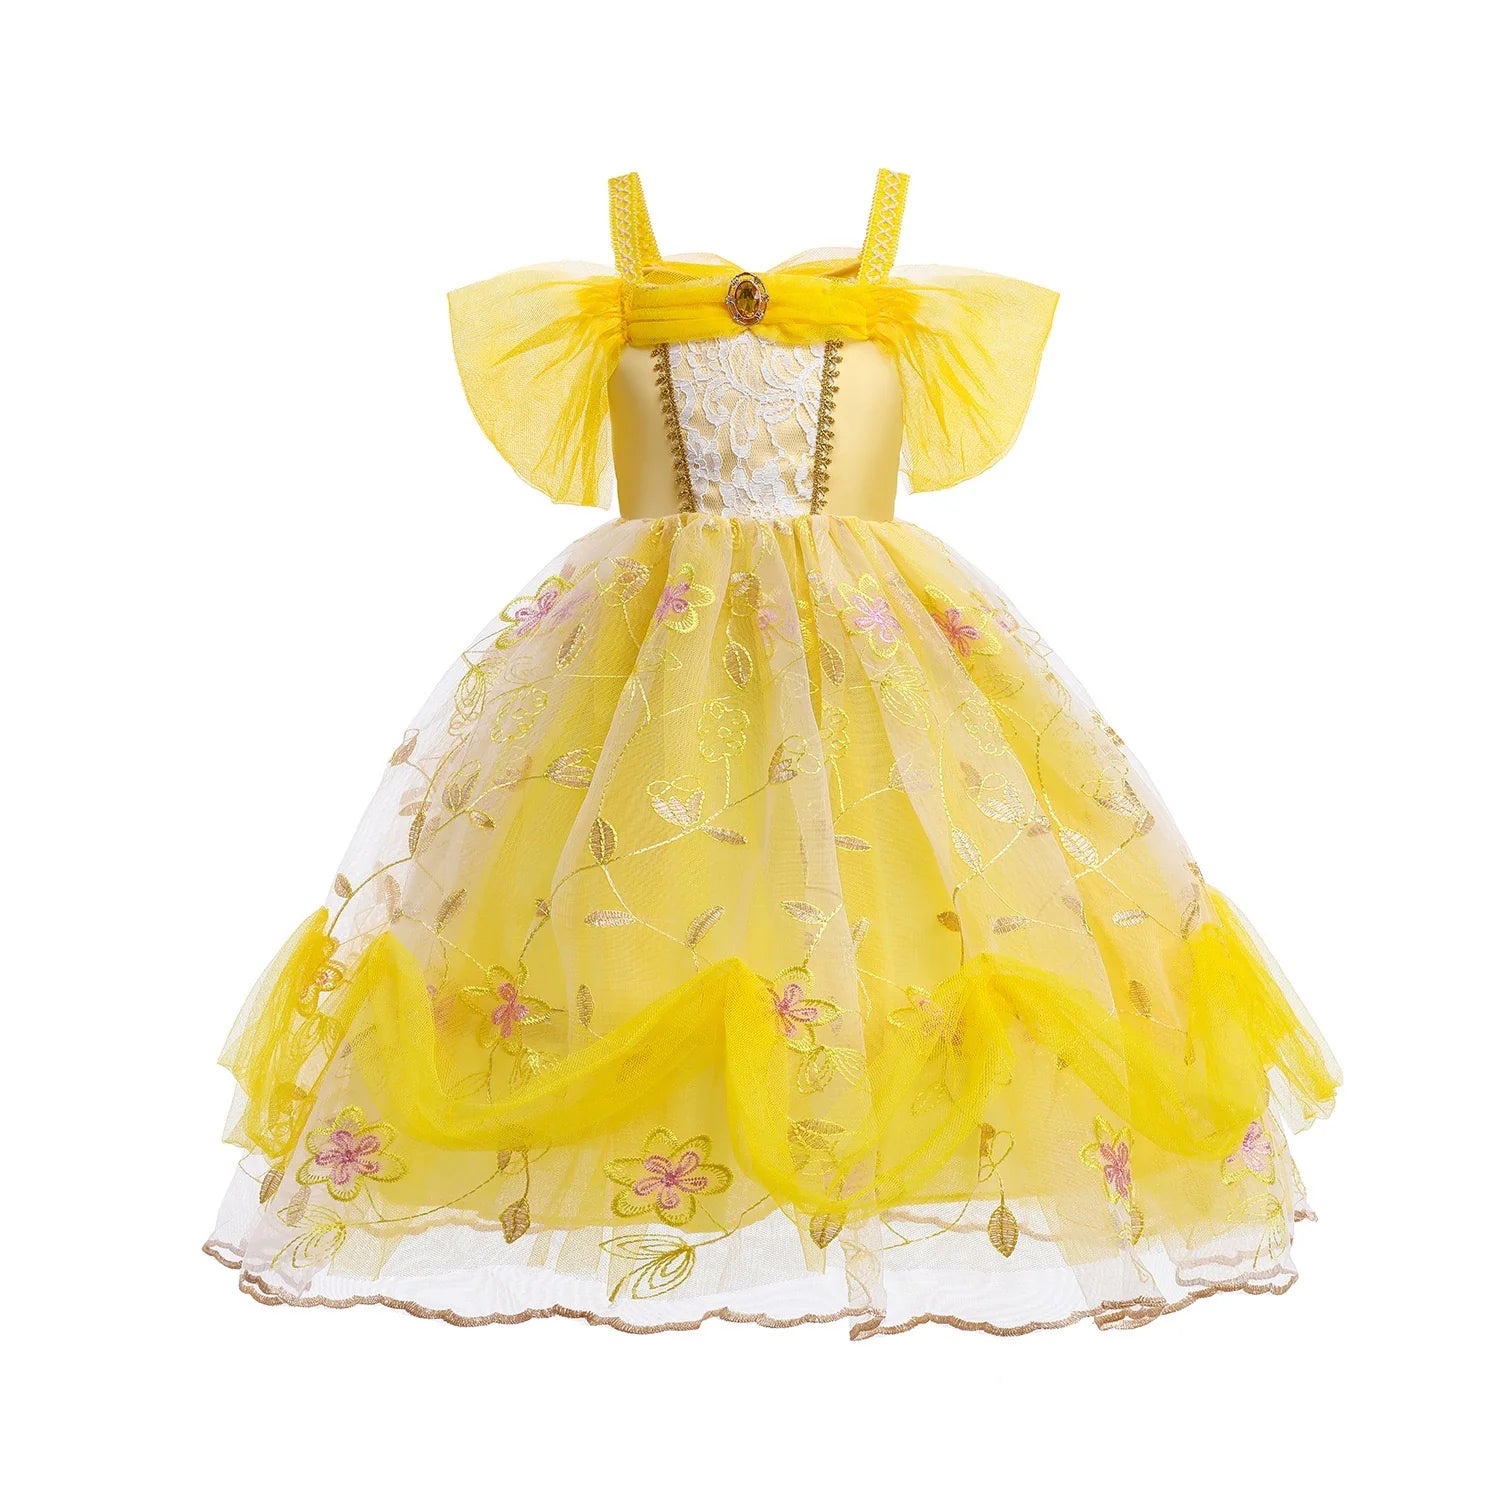 Embroidered Art Flower Lace Beauty Beast Belle Princess Dancing Party Yellow Dresses